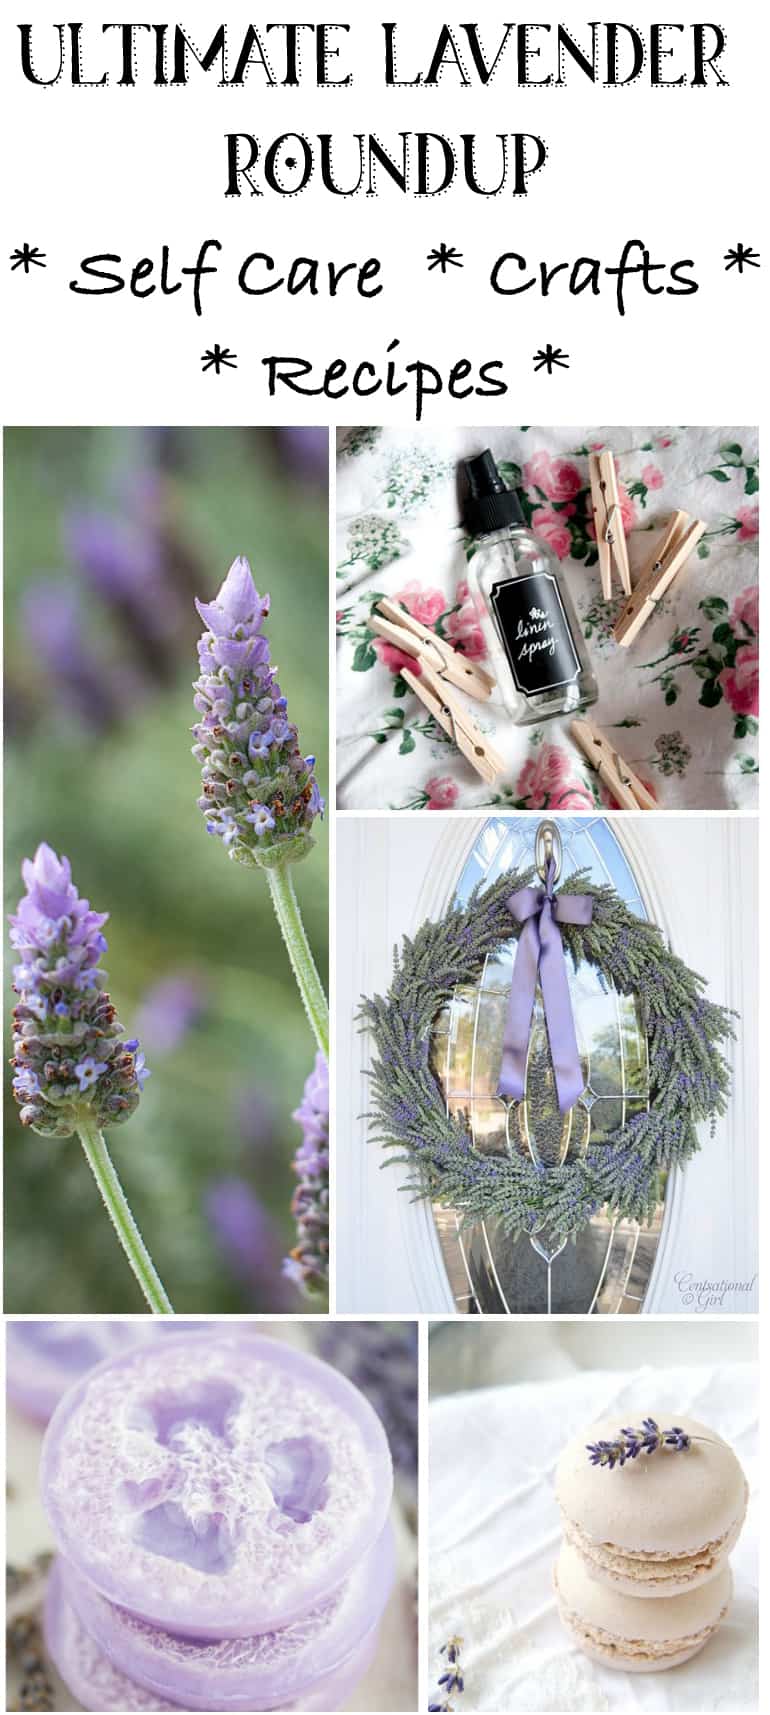 ultimate lavender roundup